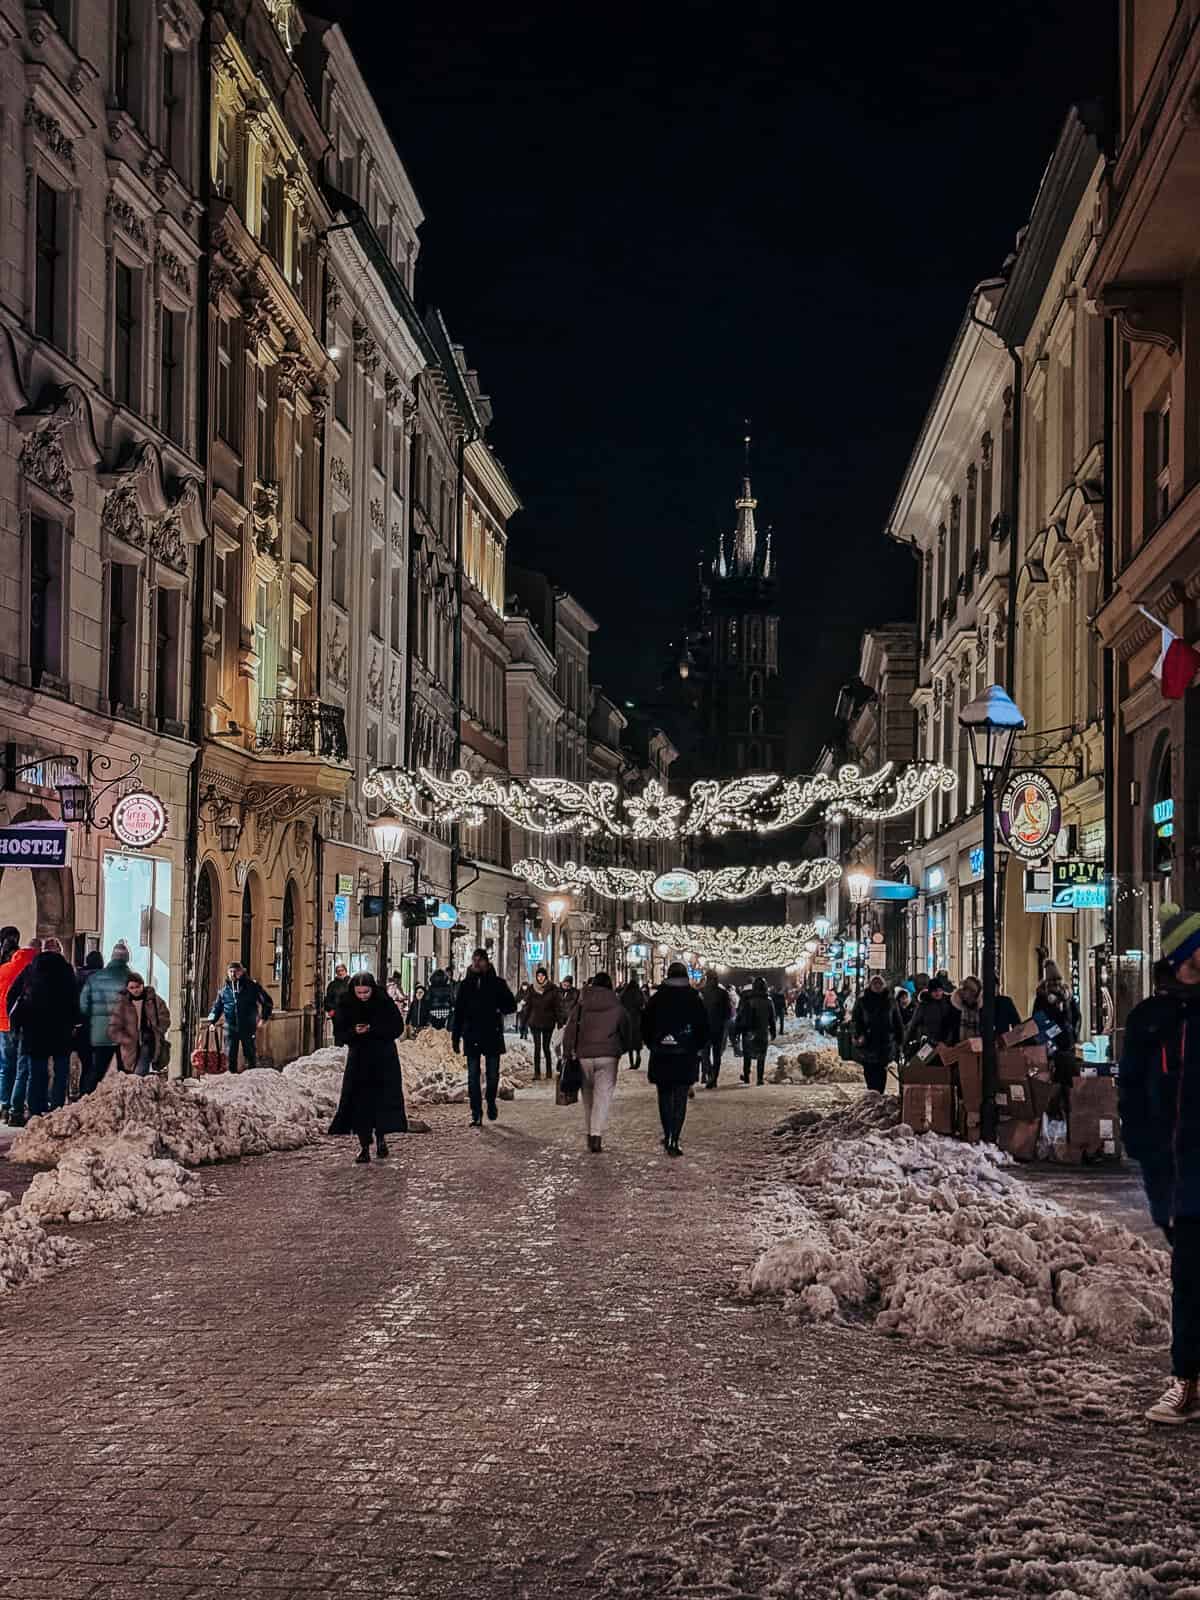 A bustling street view at night in Krakow during the Christmas season, decorated with festive lights and filled with people walking, with snow piled up along the sides